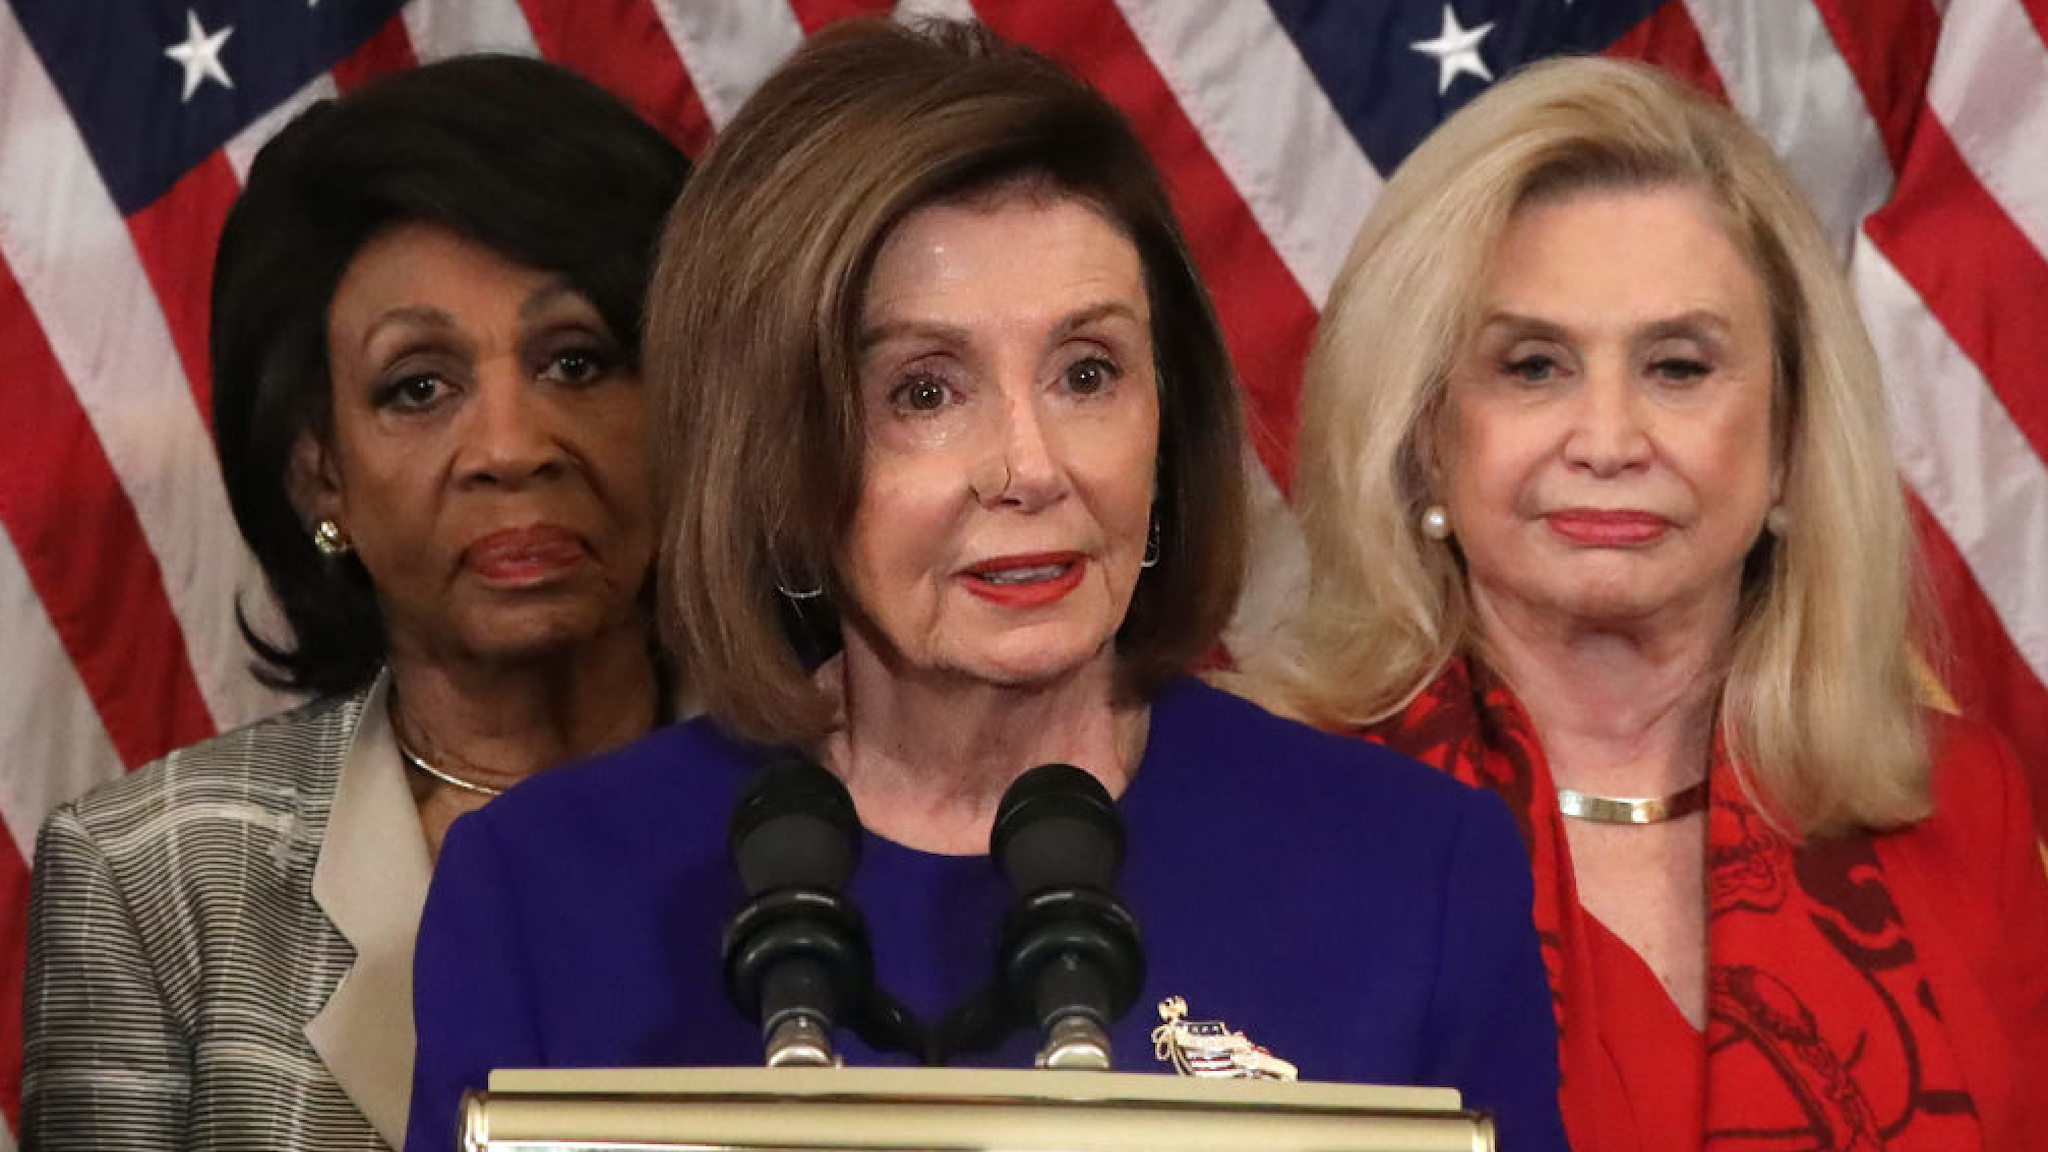 Speaker of the House Rep. Nancy Pelosi (D-CA) (C) speaks as Chairwoman of House Financial Services Committee Rep. Maxine Waters (D-CA) (L) and Chairwoman of House Oversight and Reform Committee Rep. Carolyn Maloney (D-NY) (R) listen during a news conference at the U.S. Capitol December 10, 2019 in Washington, DC.